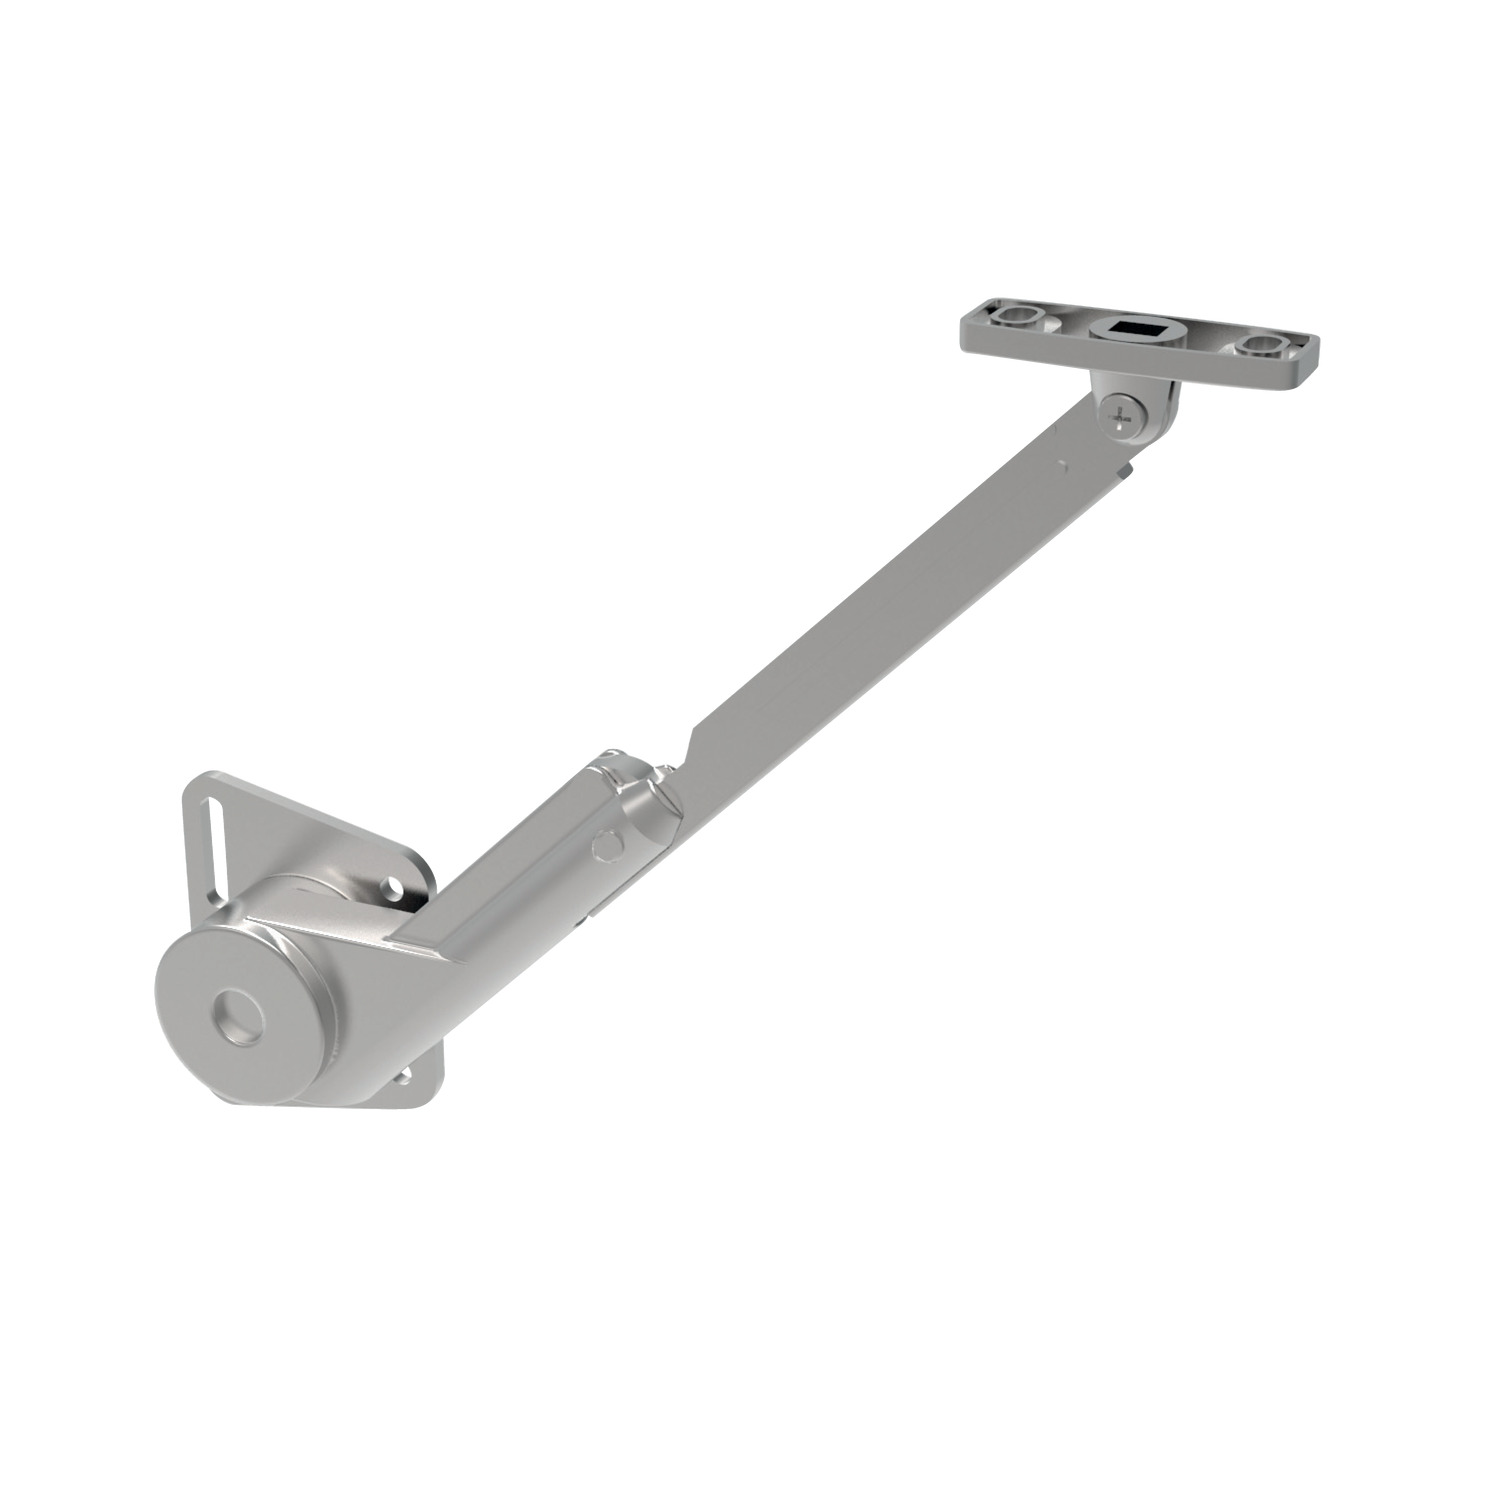 Quicklift Alloy Steel Eye Hook With Latch, Loose, Powder Coated at